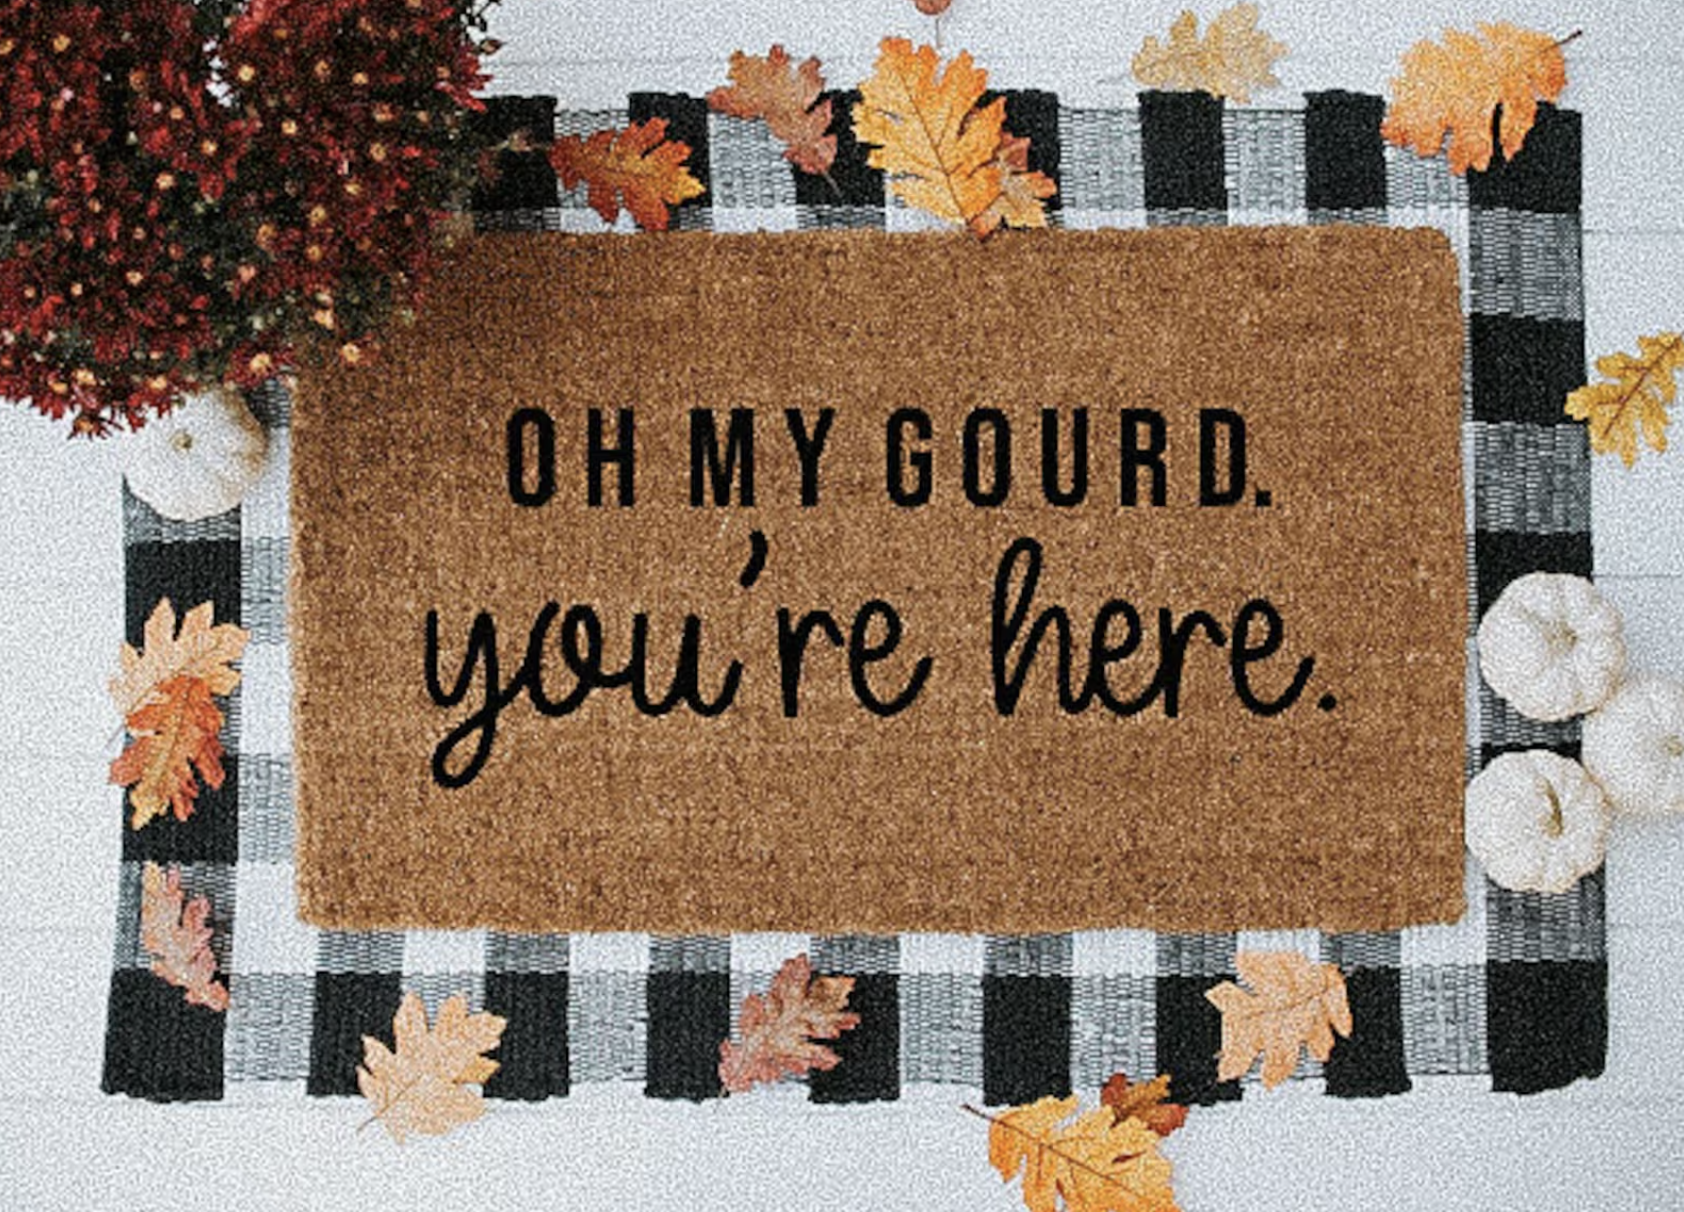 Home Sweet Home Door Mat 30x17 Inches, Welcome Home Mats for Front Door, Farmhouse Welcome Mat with Thick Anti-Slip PVC Backing, Coir Mat, Welcome Mat